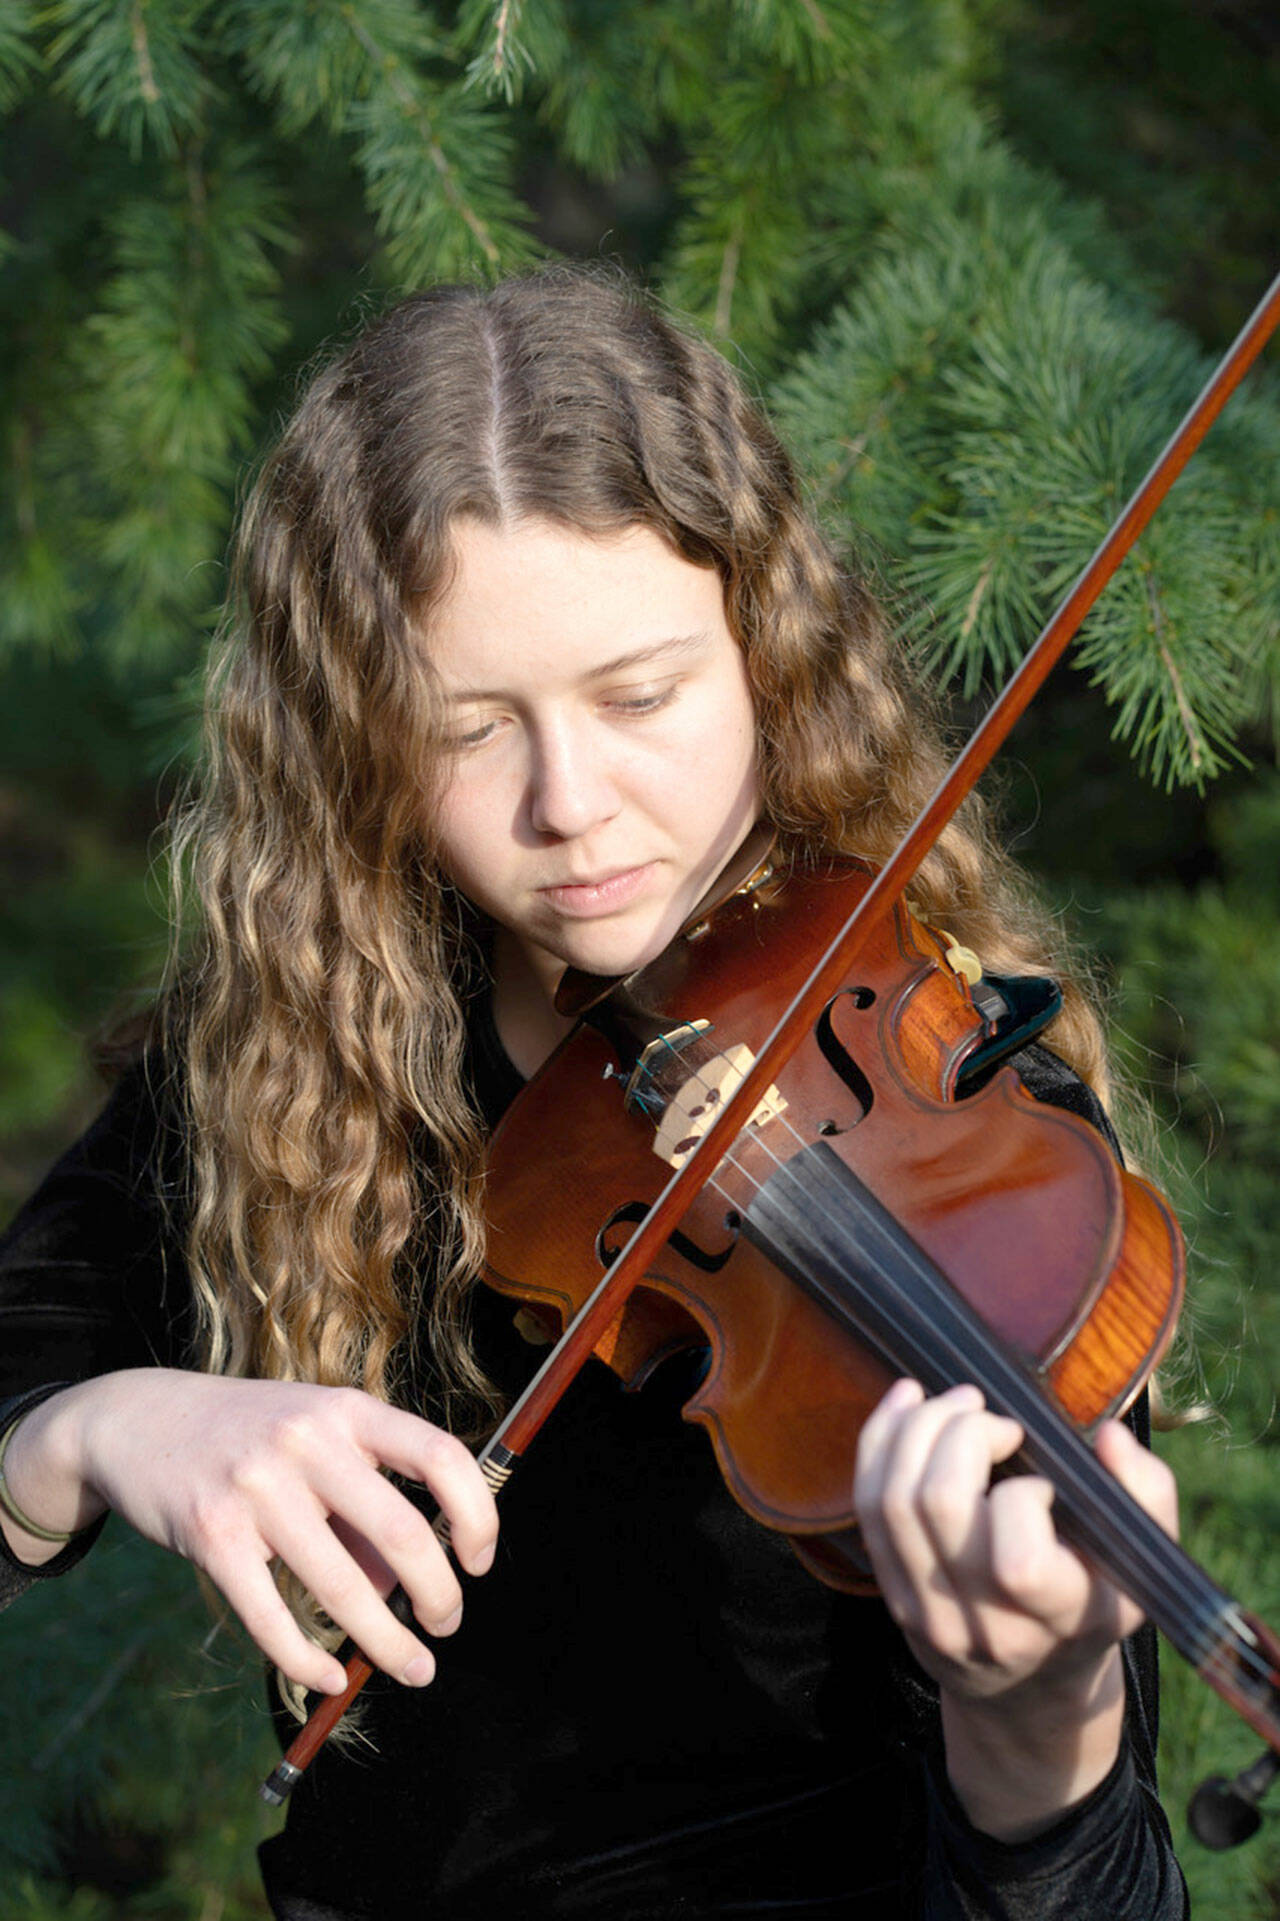 Zia Magill will perform a violin solo on Sunday at Chimacum High School as part of the Port Townsend Symphony Orchestra’s April concert. (Jessica Plumb)